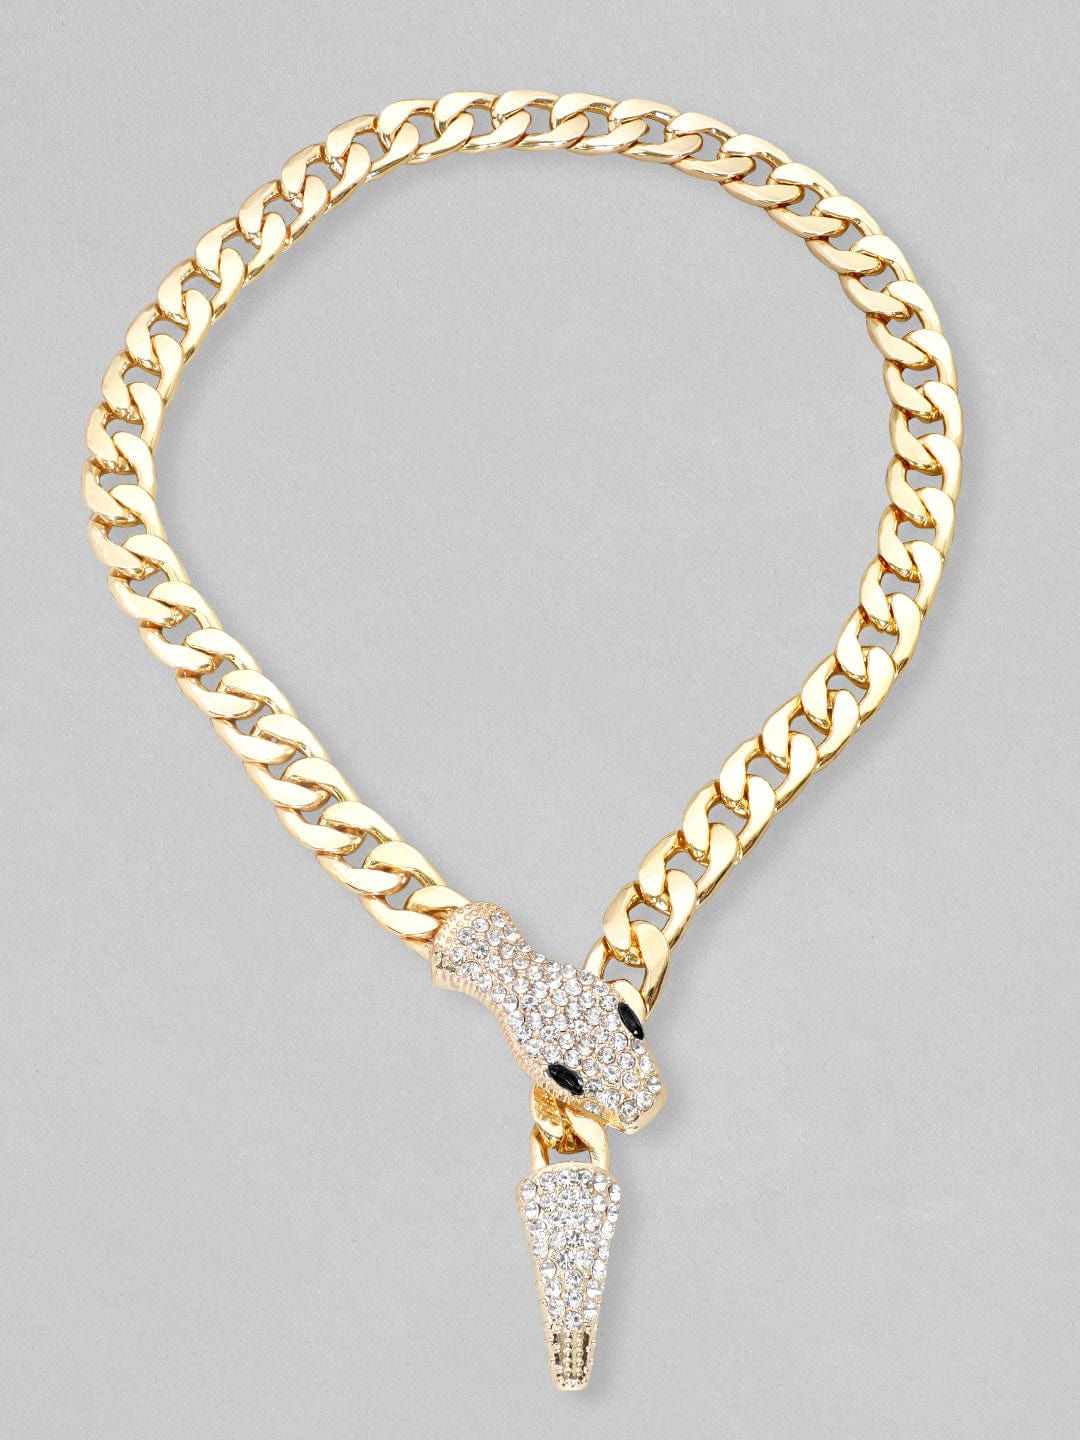 Rubans Voguish Gold Toned Link Style Serpent Chain With Zircon Stones Studded. Chain &amp; Necklaces